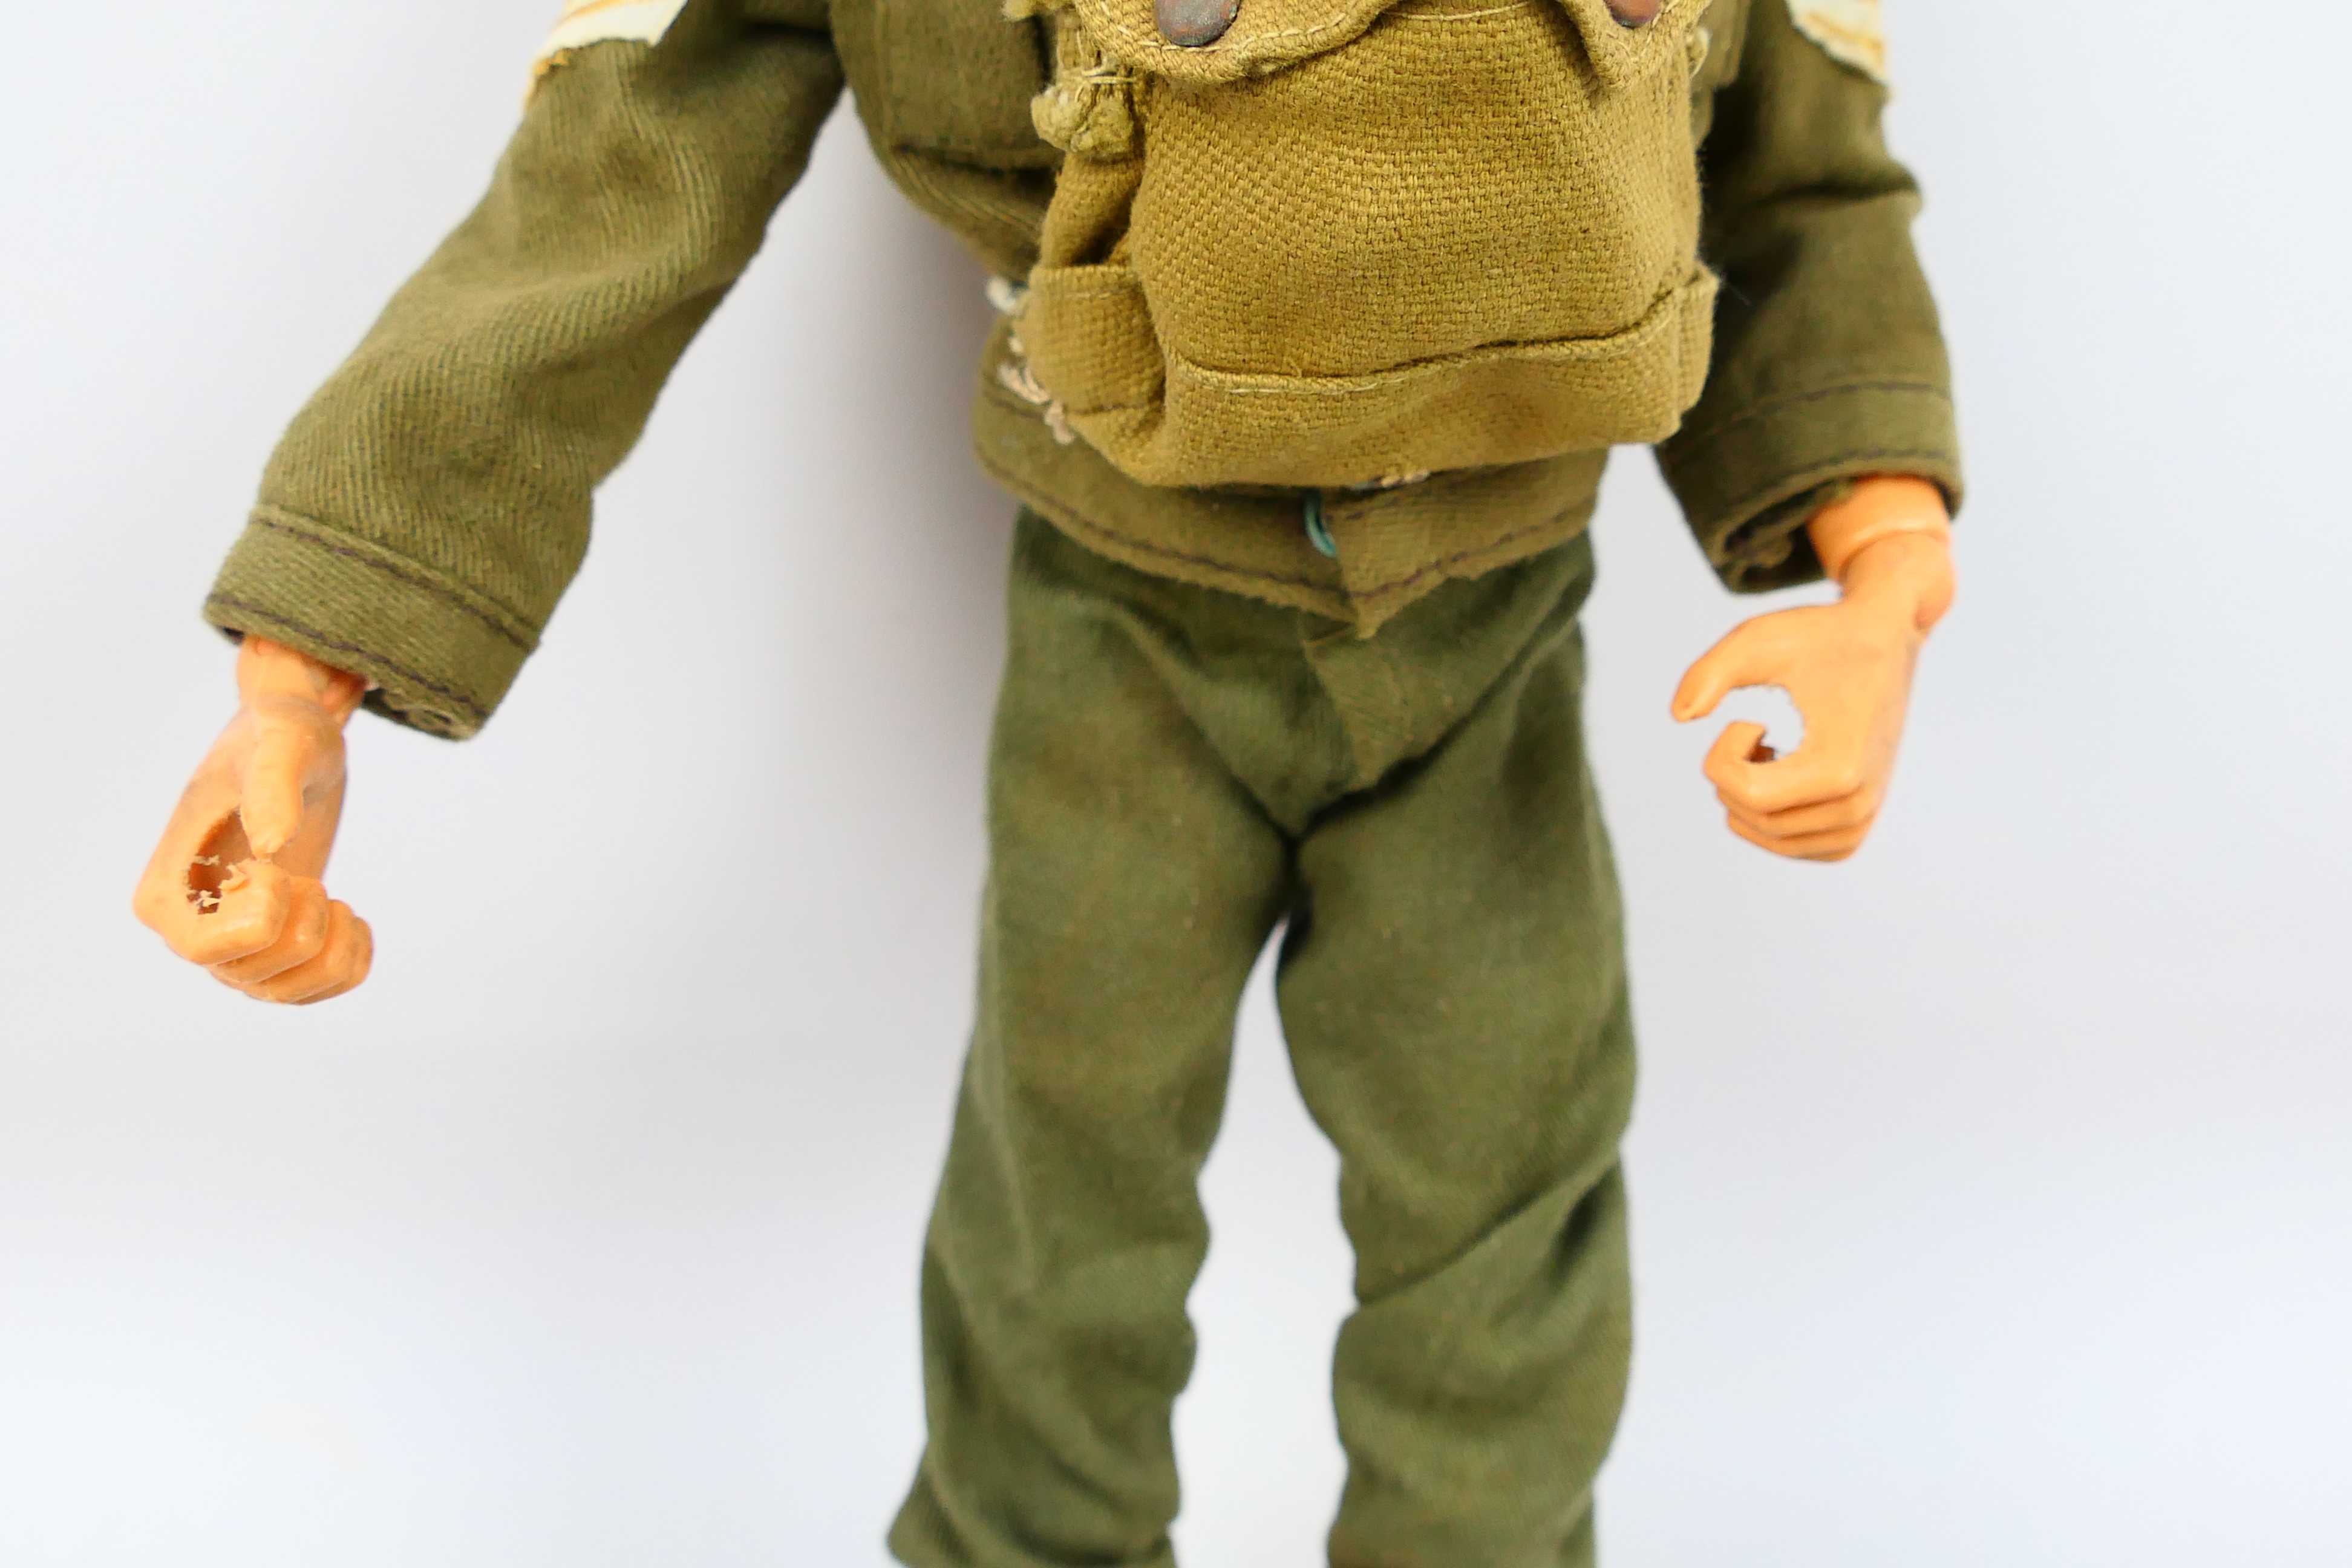 Palitoy - Action Man - A 1978 Action Man action figure with Flock hair and eagle eyes in a British - Image 7 of 16